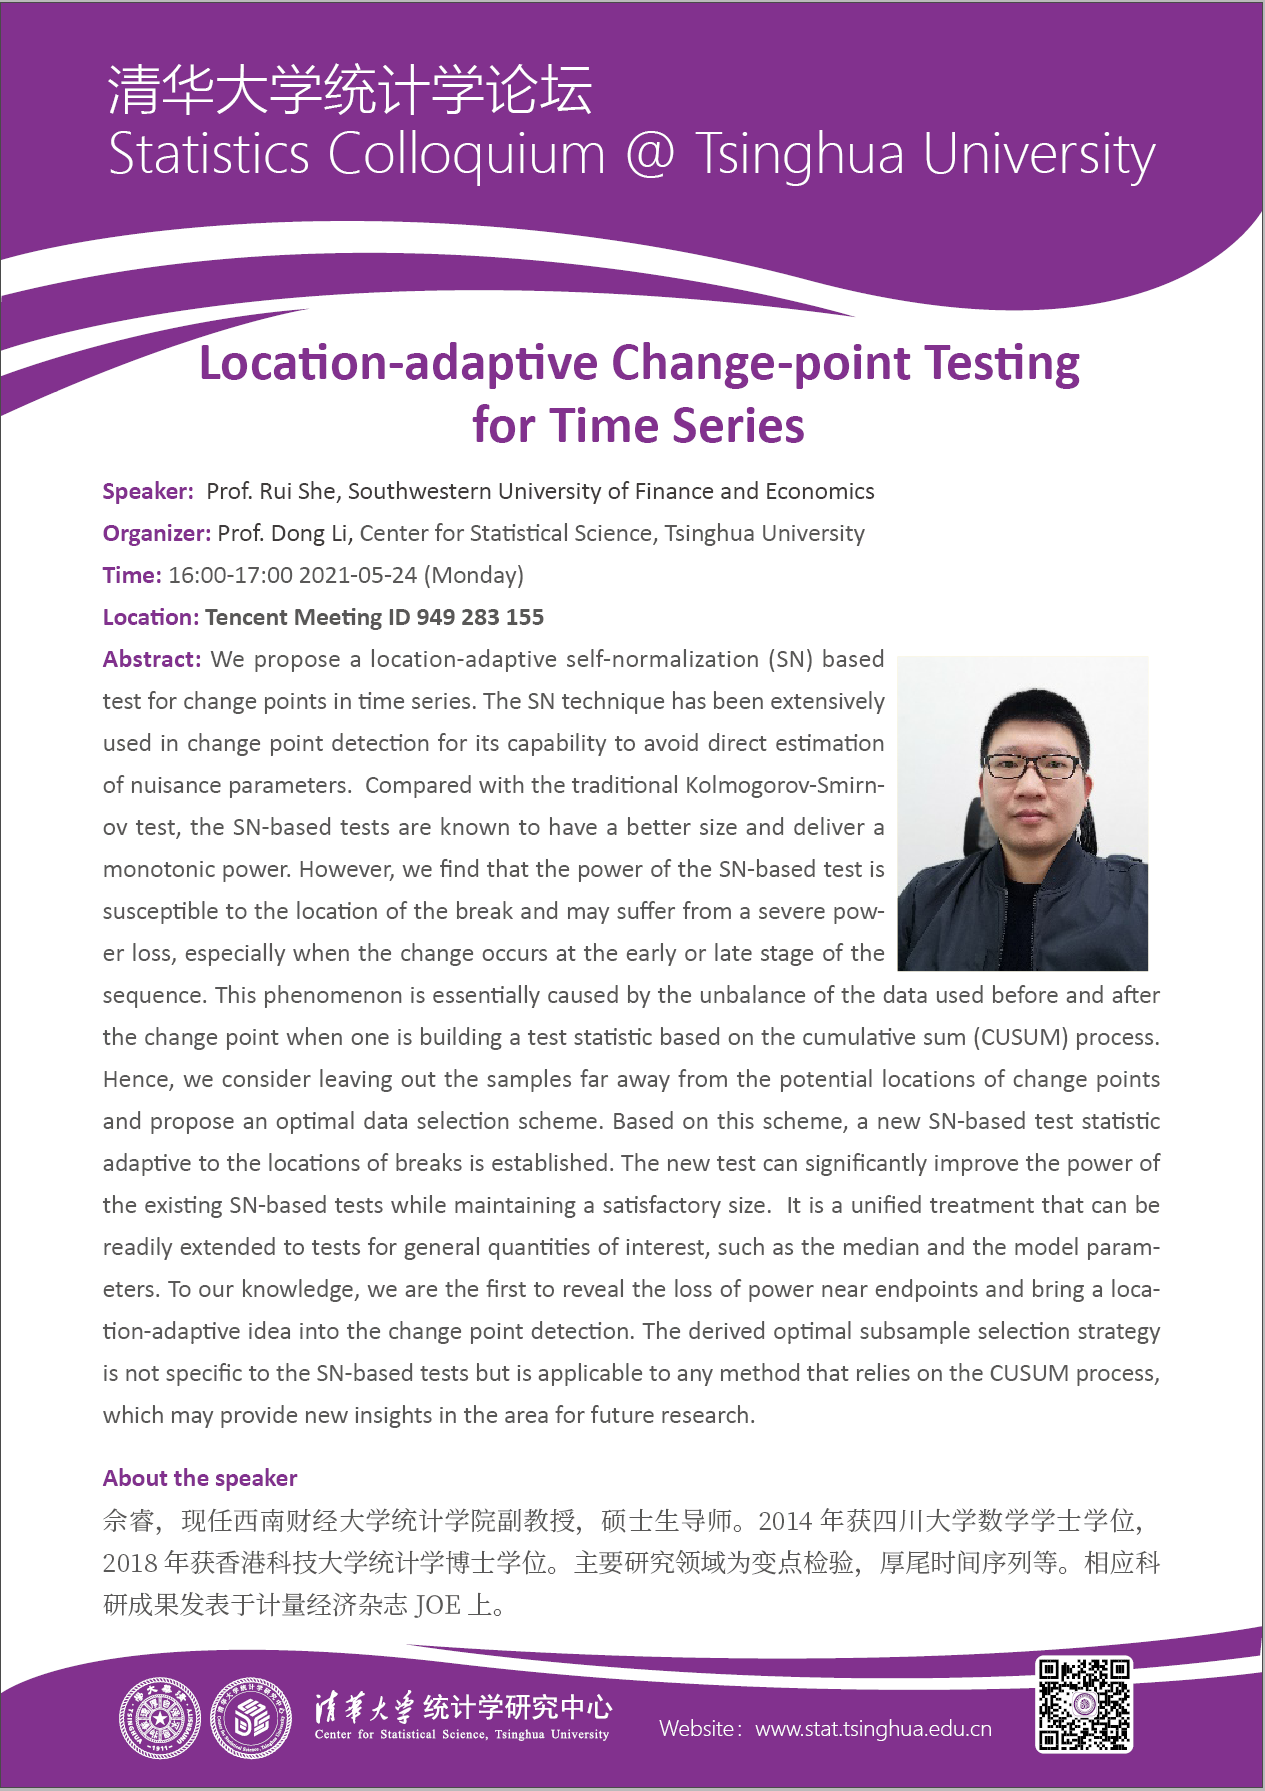 Location-adaptive Change-point Testing for Time Series